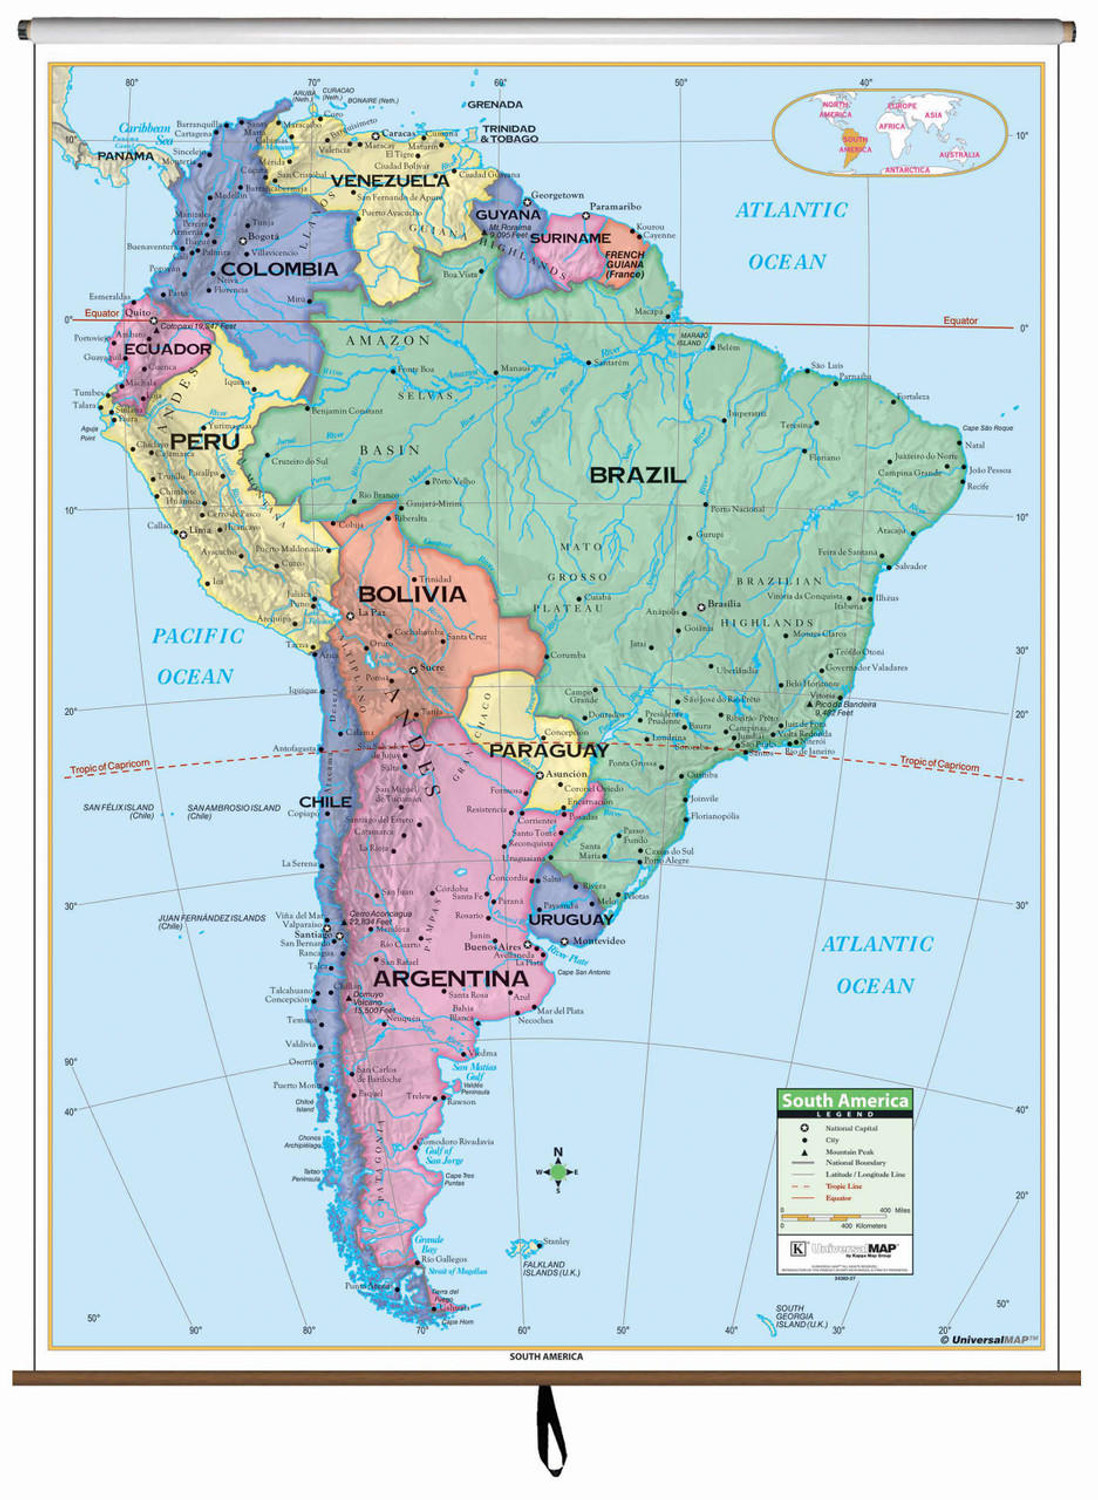 Primary South America Map on Spring Roller from Kappa Maps, image 1, World Maps Online